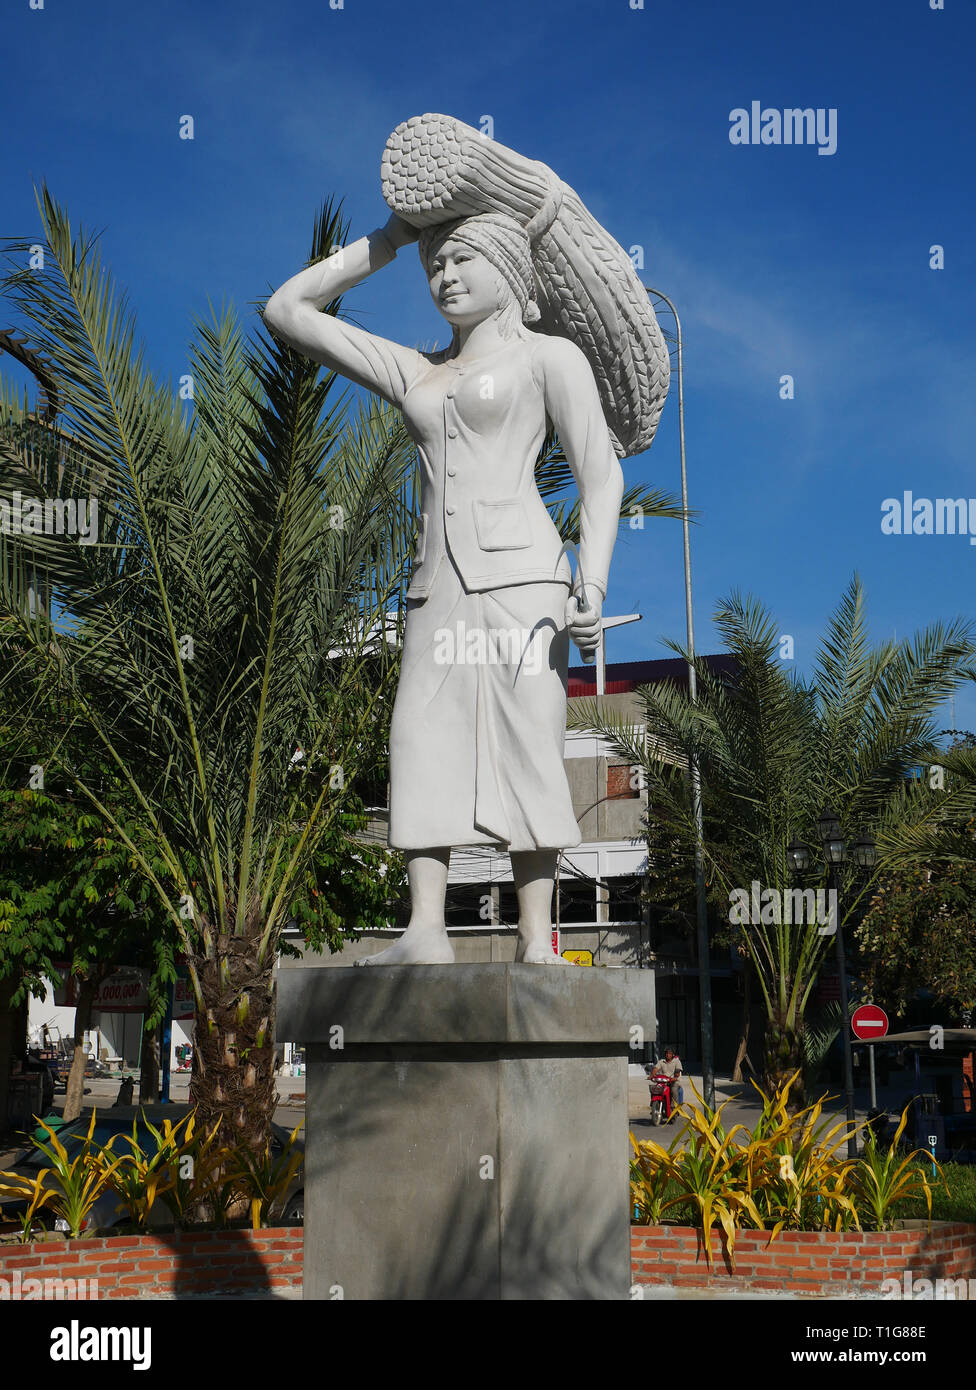 Battambang, Cambodia. The Rice Harvest statue depicts a woman in a skirt with a sheaf of rice balanced on her head and a sickle in her hand. Stock Photo